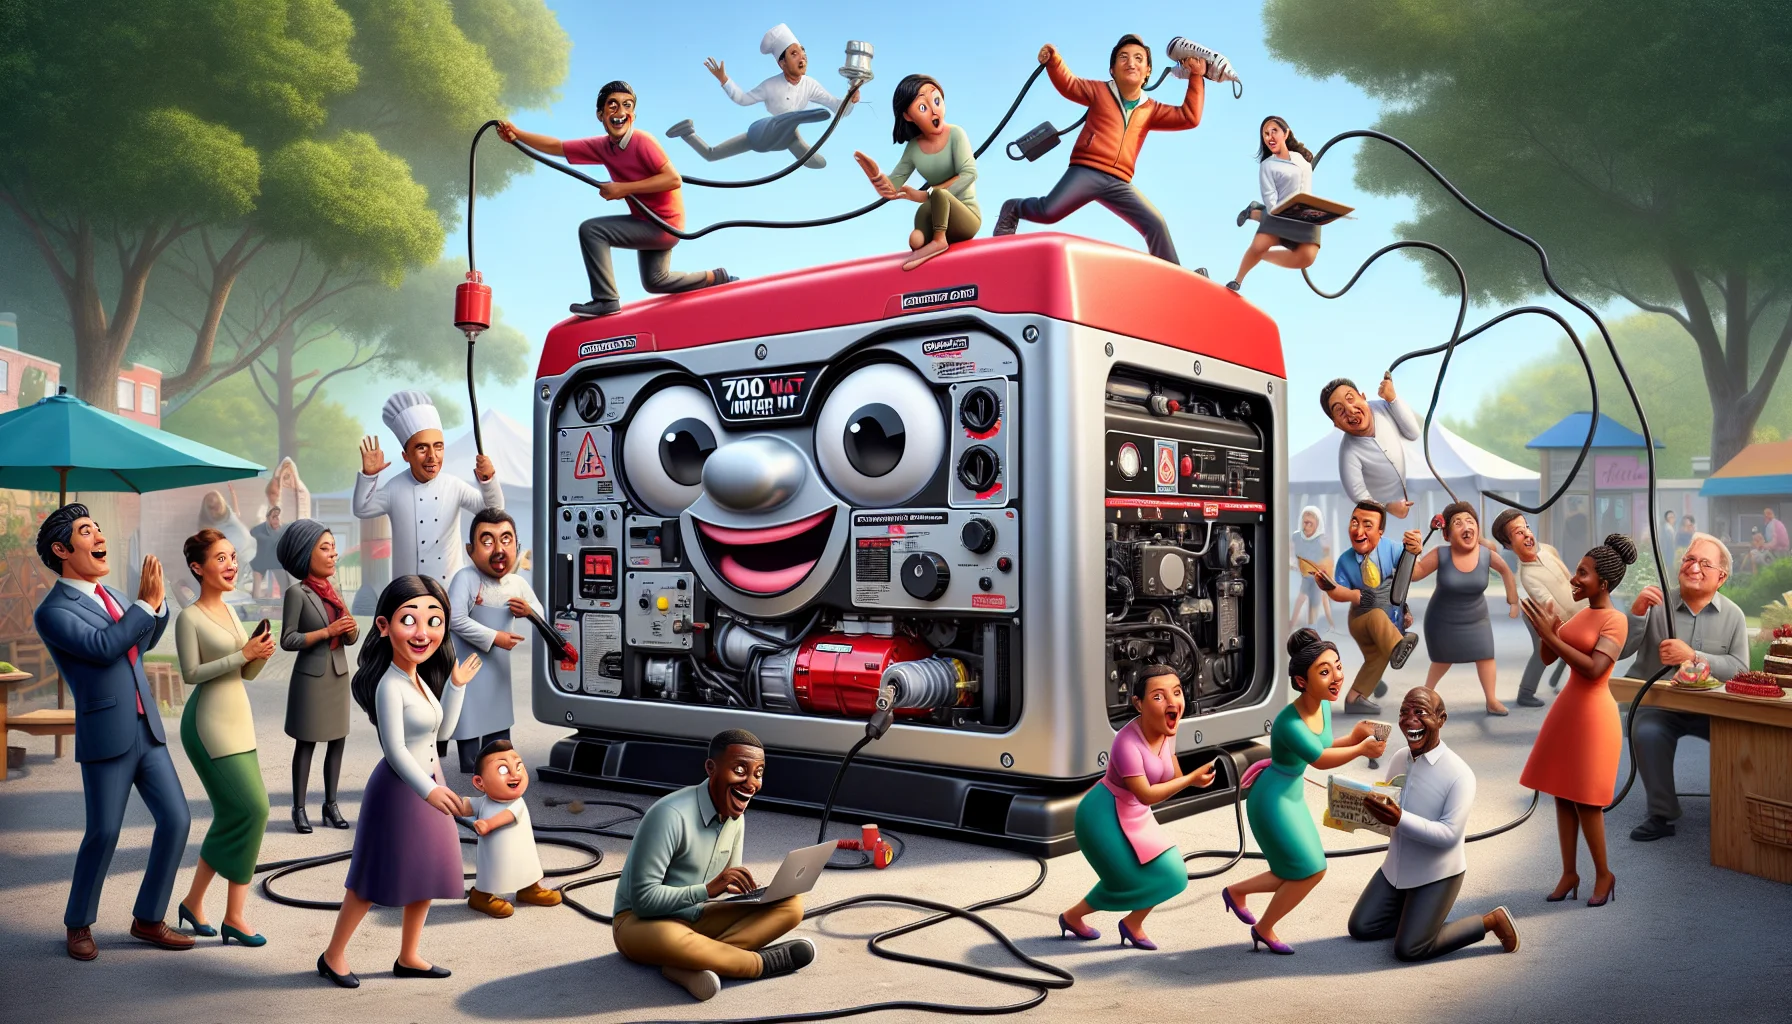 A large, robust 7000 watt inverter generator painted in bright red and silver colors, situated in the middle of a lively scene. The generator is animated with cartoon eyes and a broad smile, enticing people around it. To its left, a diverse group of people including a South Asian female engineer, a Black male office worker, and a Caucasian elderly woman are joyfully plugging in various electric appliances. To its right, a Middle-Eastern male chef and a Hispanic female dancer are fascinated by the electricity it's generating, adding a humorous twist to their activities. The background is a sunny park filled with trees, making a stark contrast with the high-tech generator.